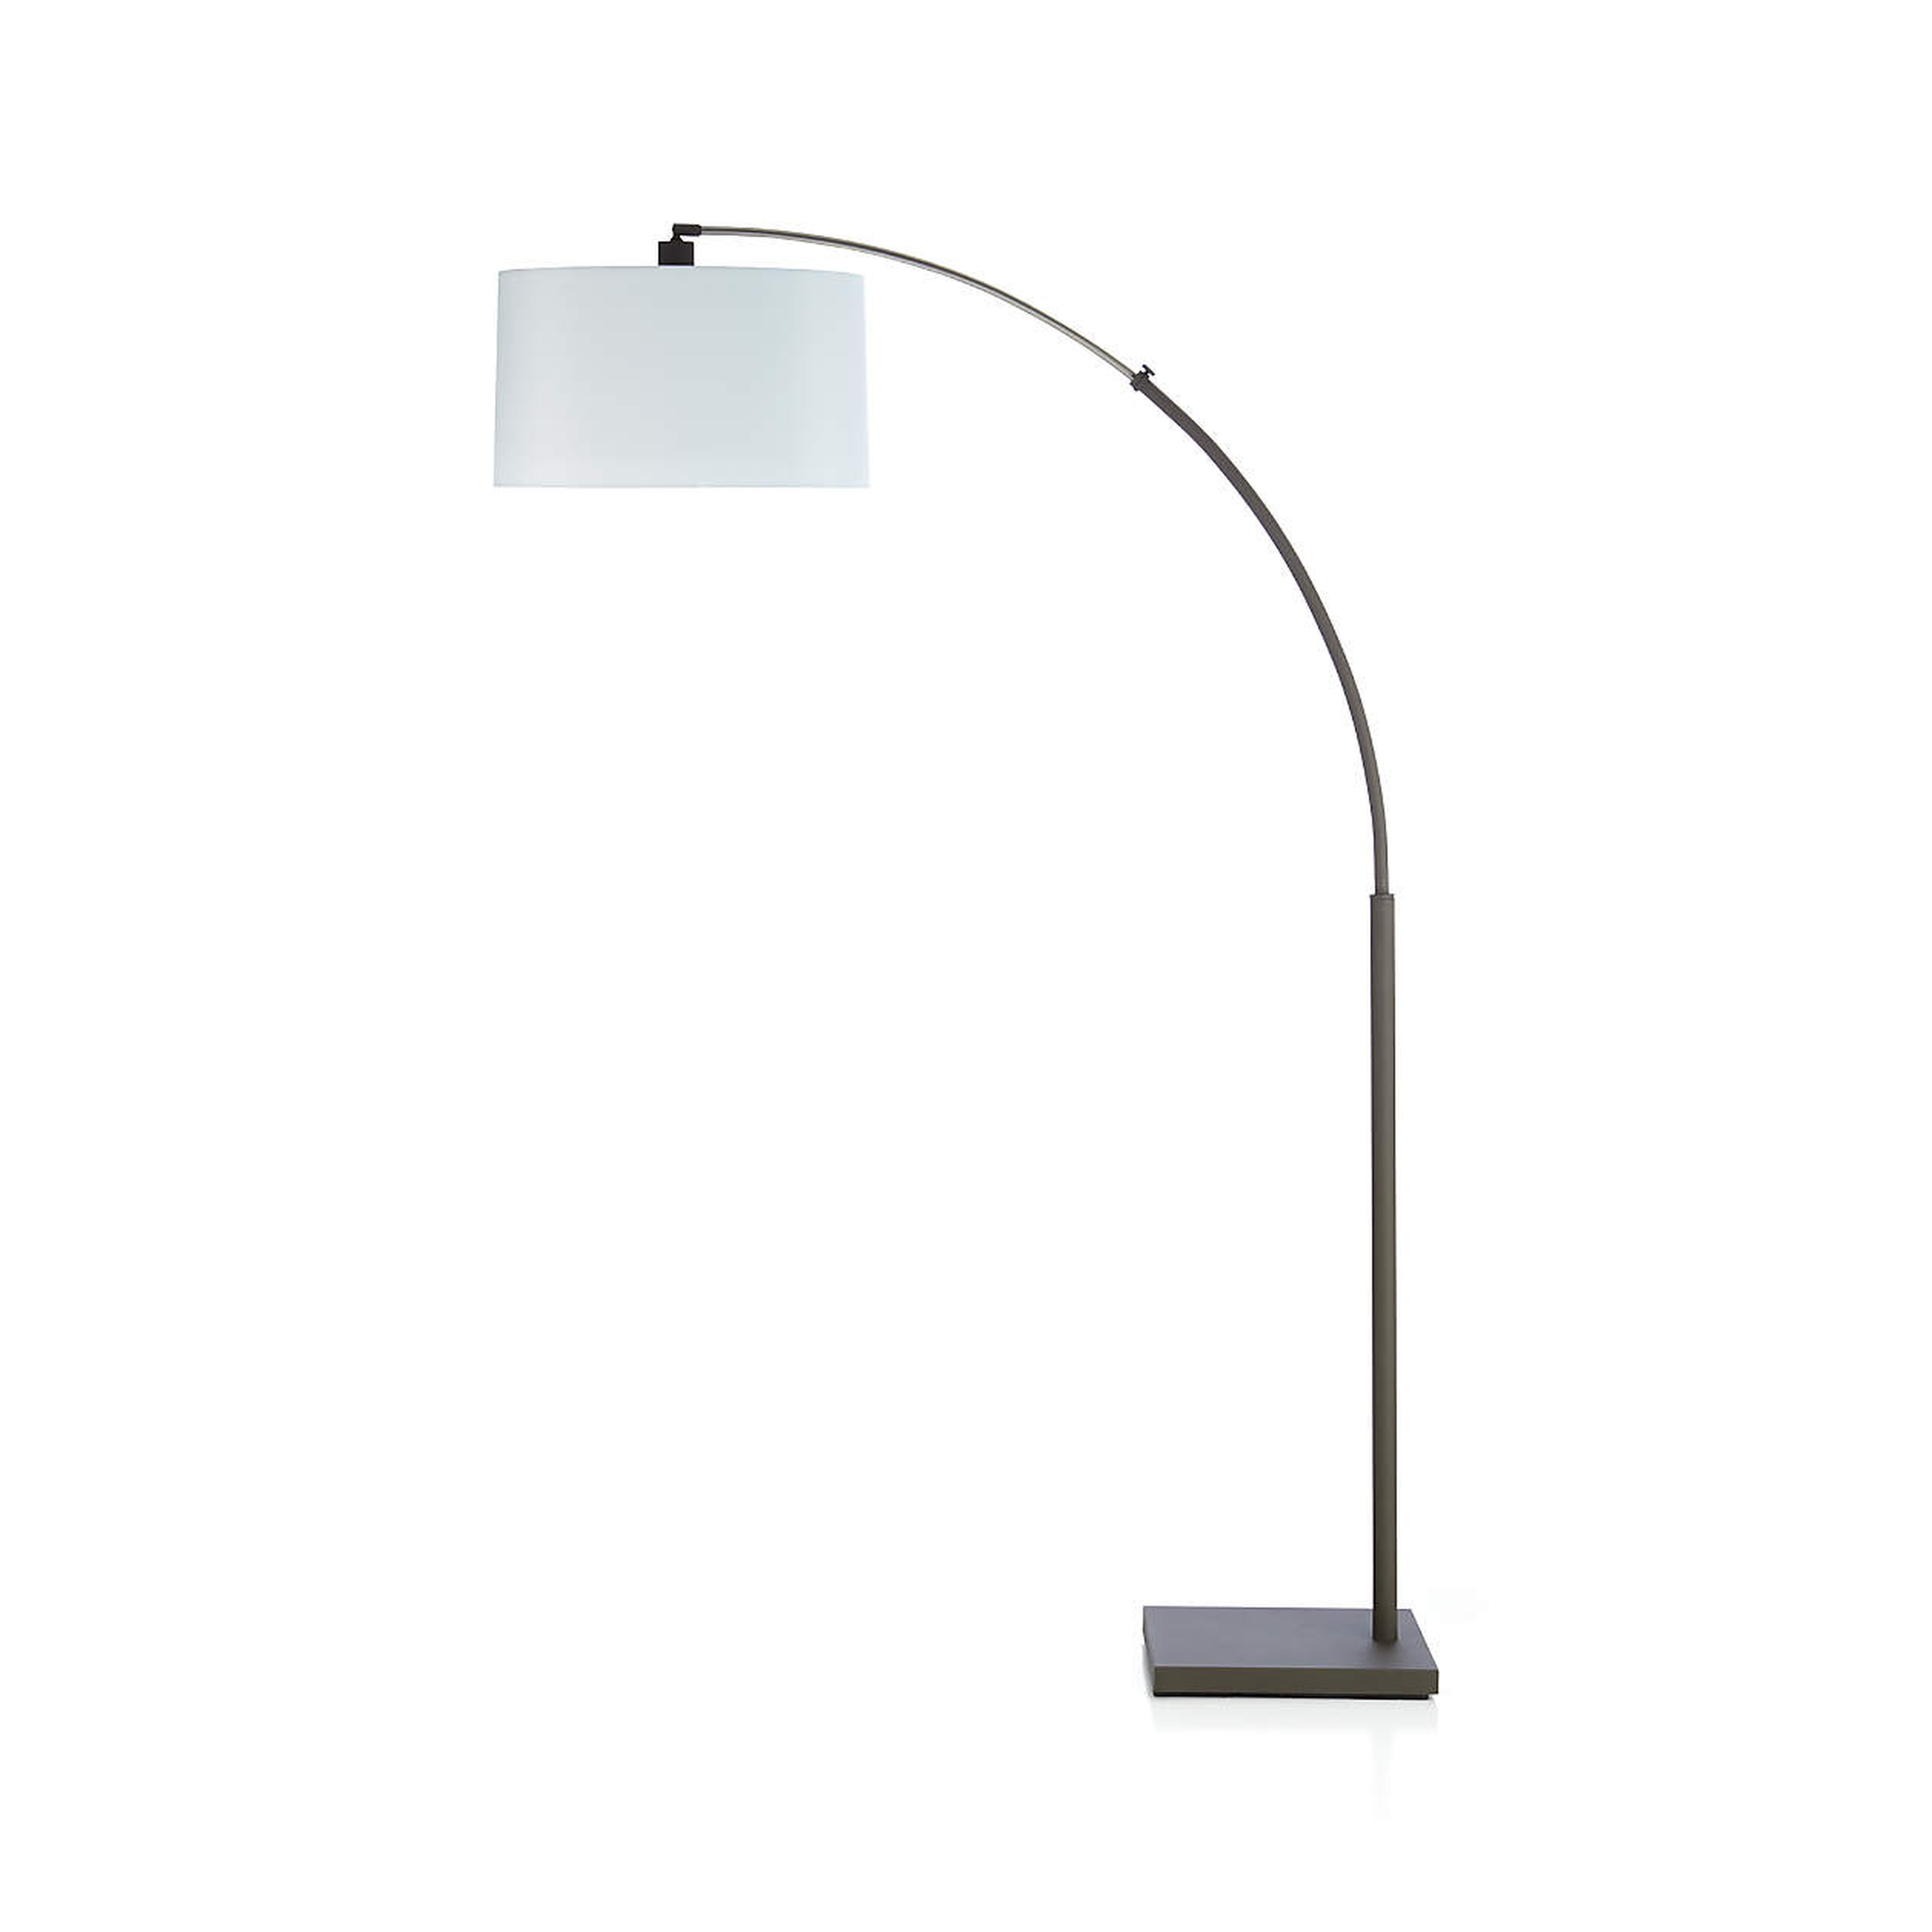 Dexter Arc Floor Lamp with White Shade - Crate and Barrel